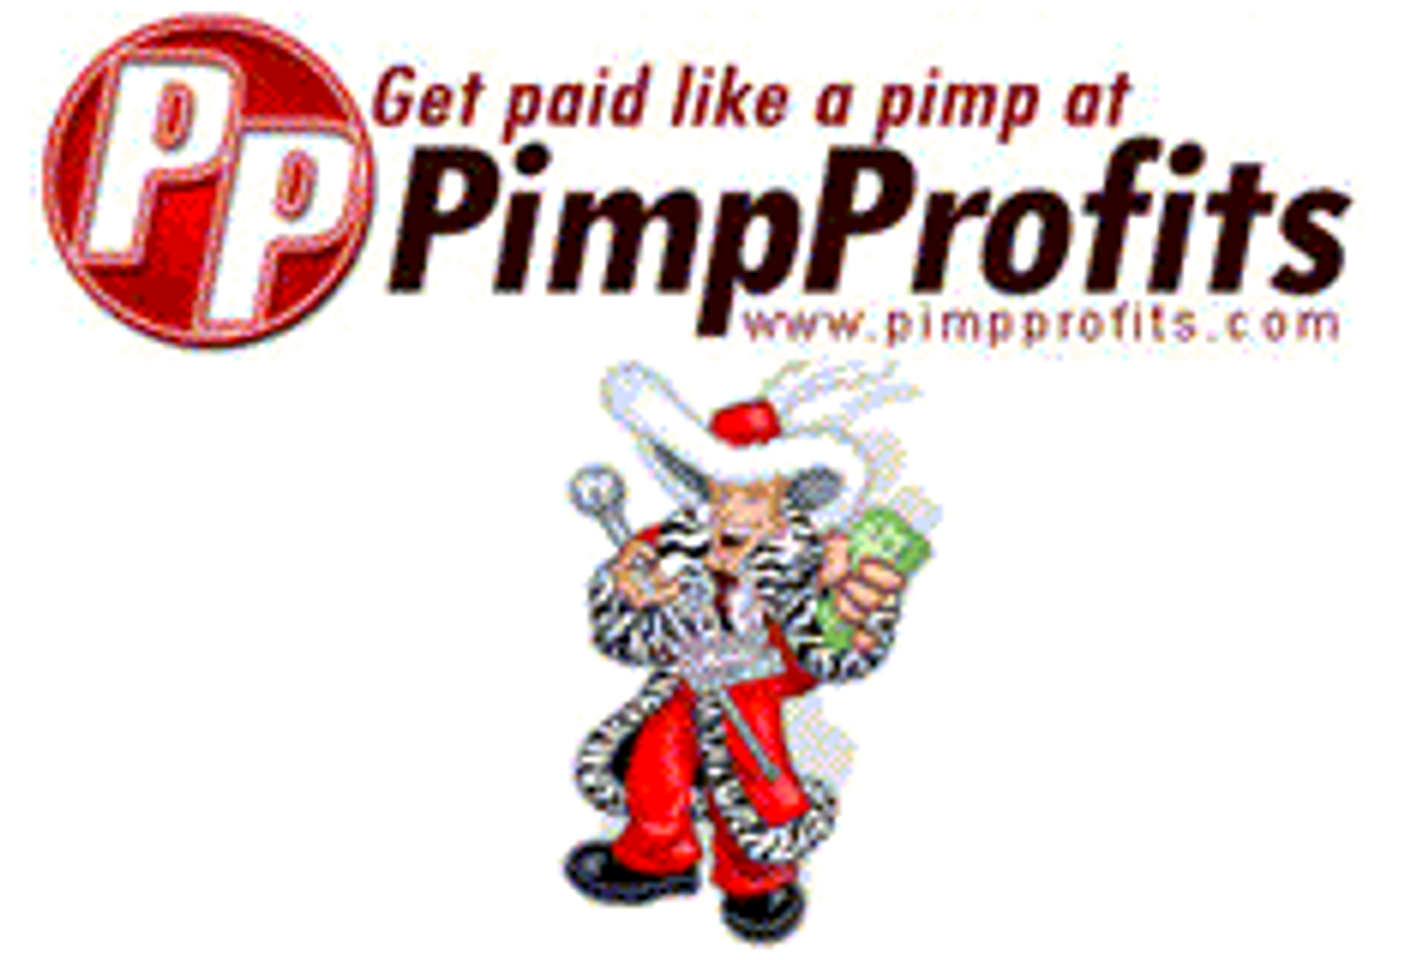 PimpProfits Offers Free Photo and Video Content